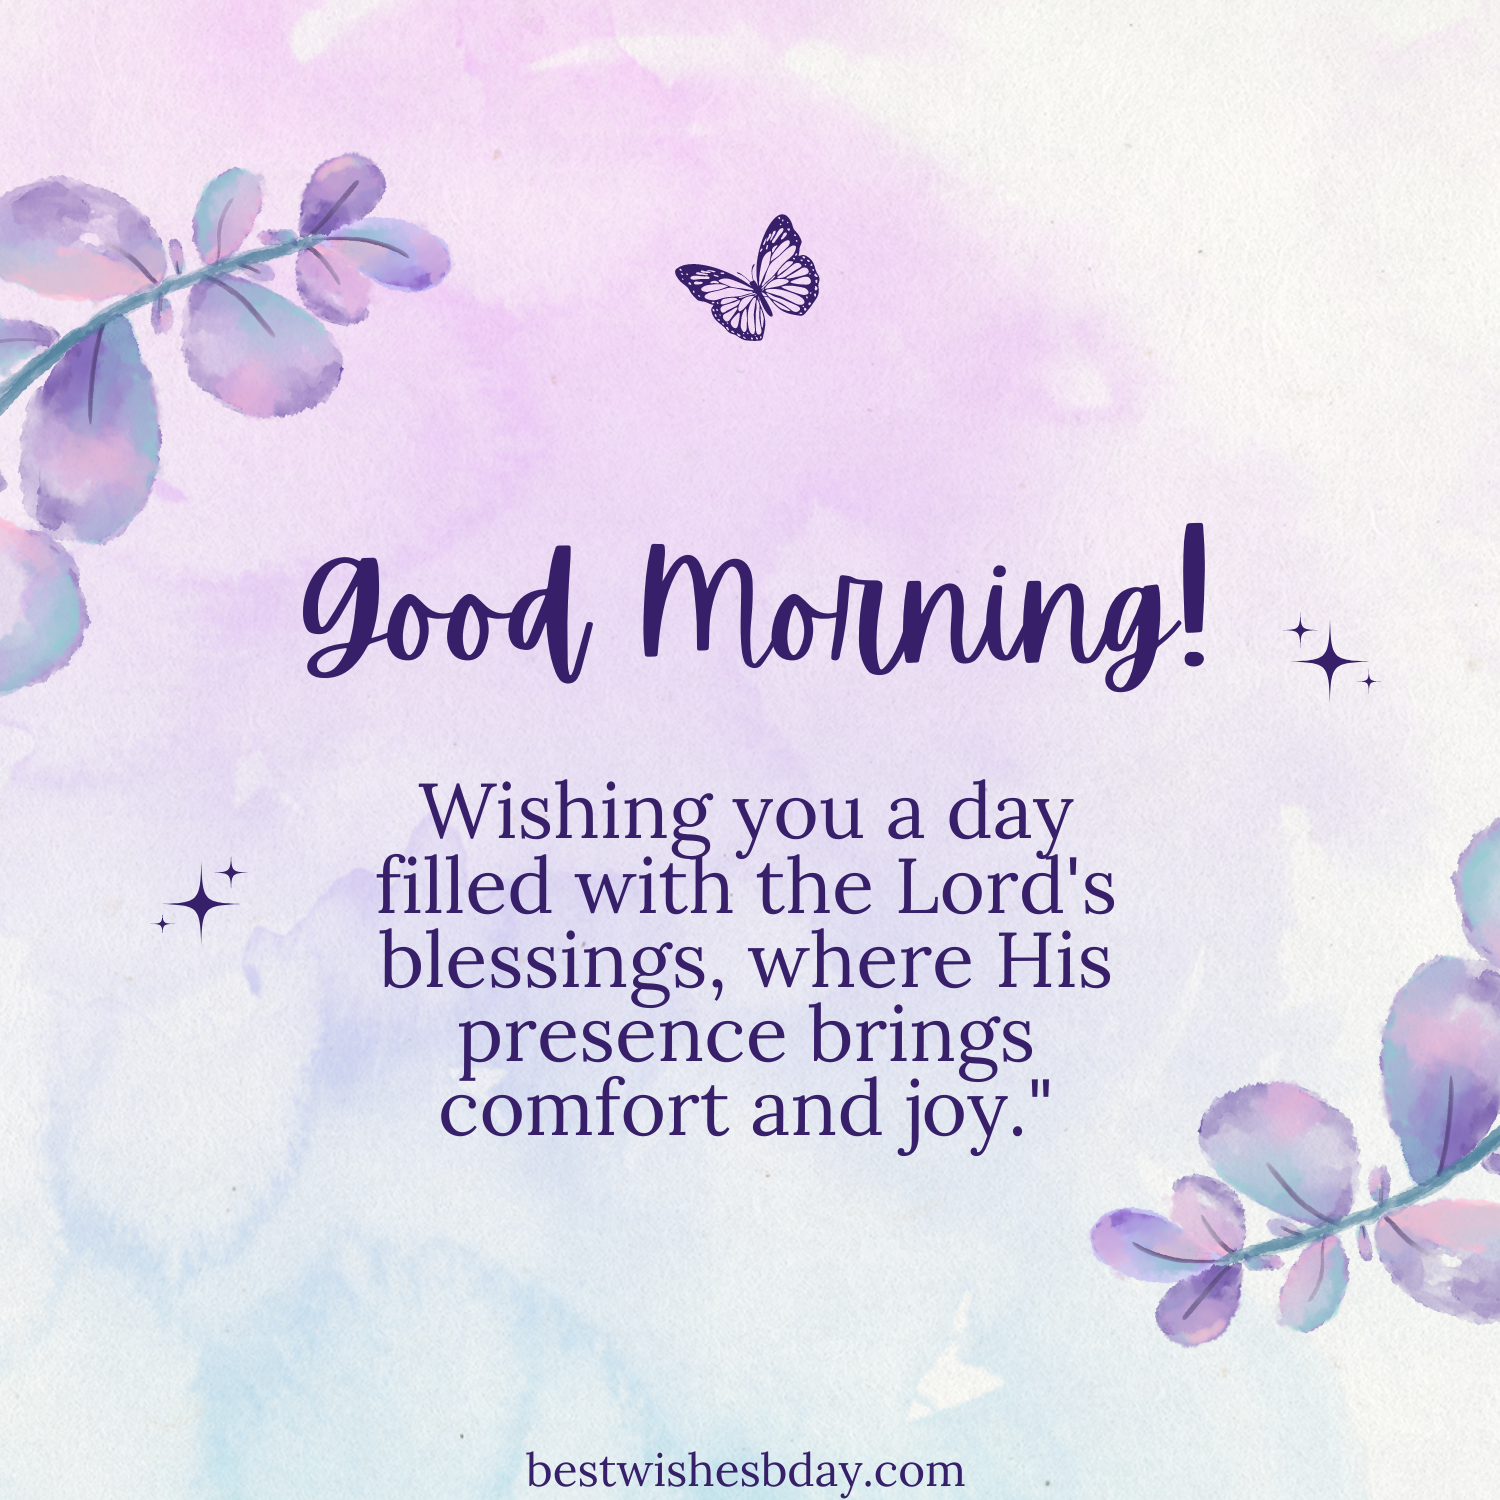 Good Morning Blessings Image Quote